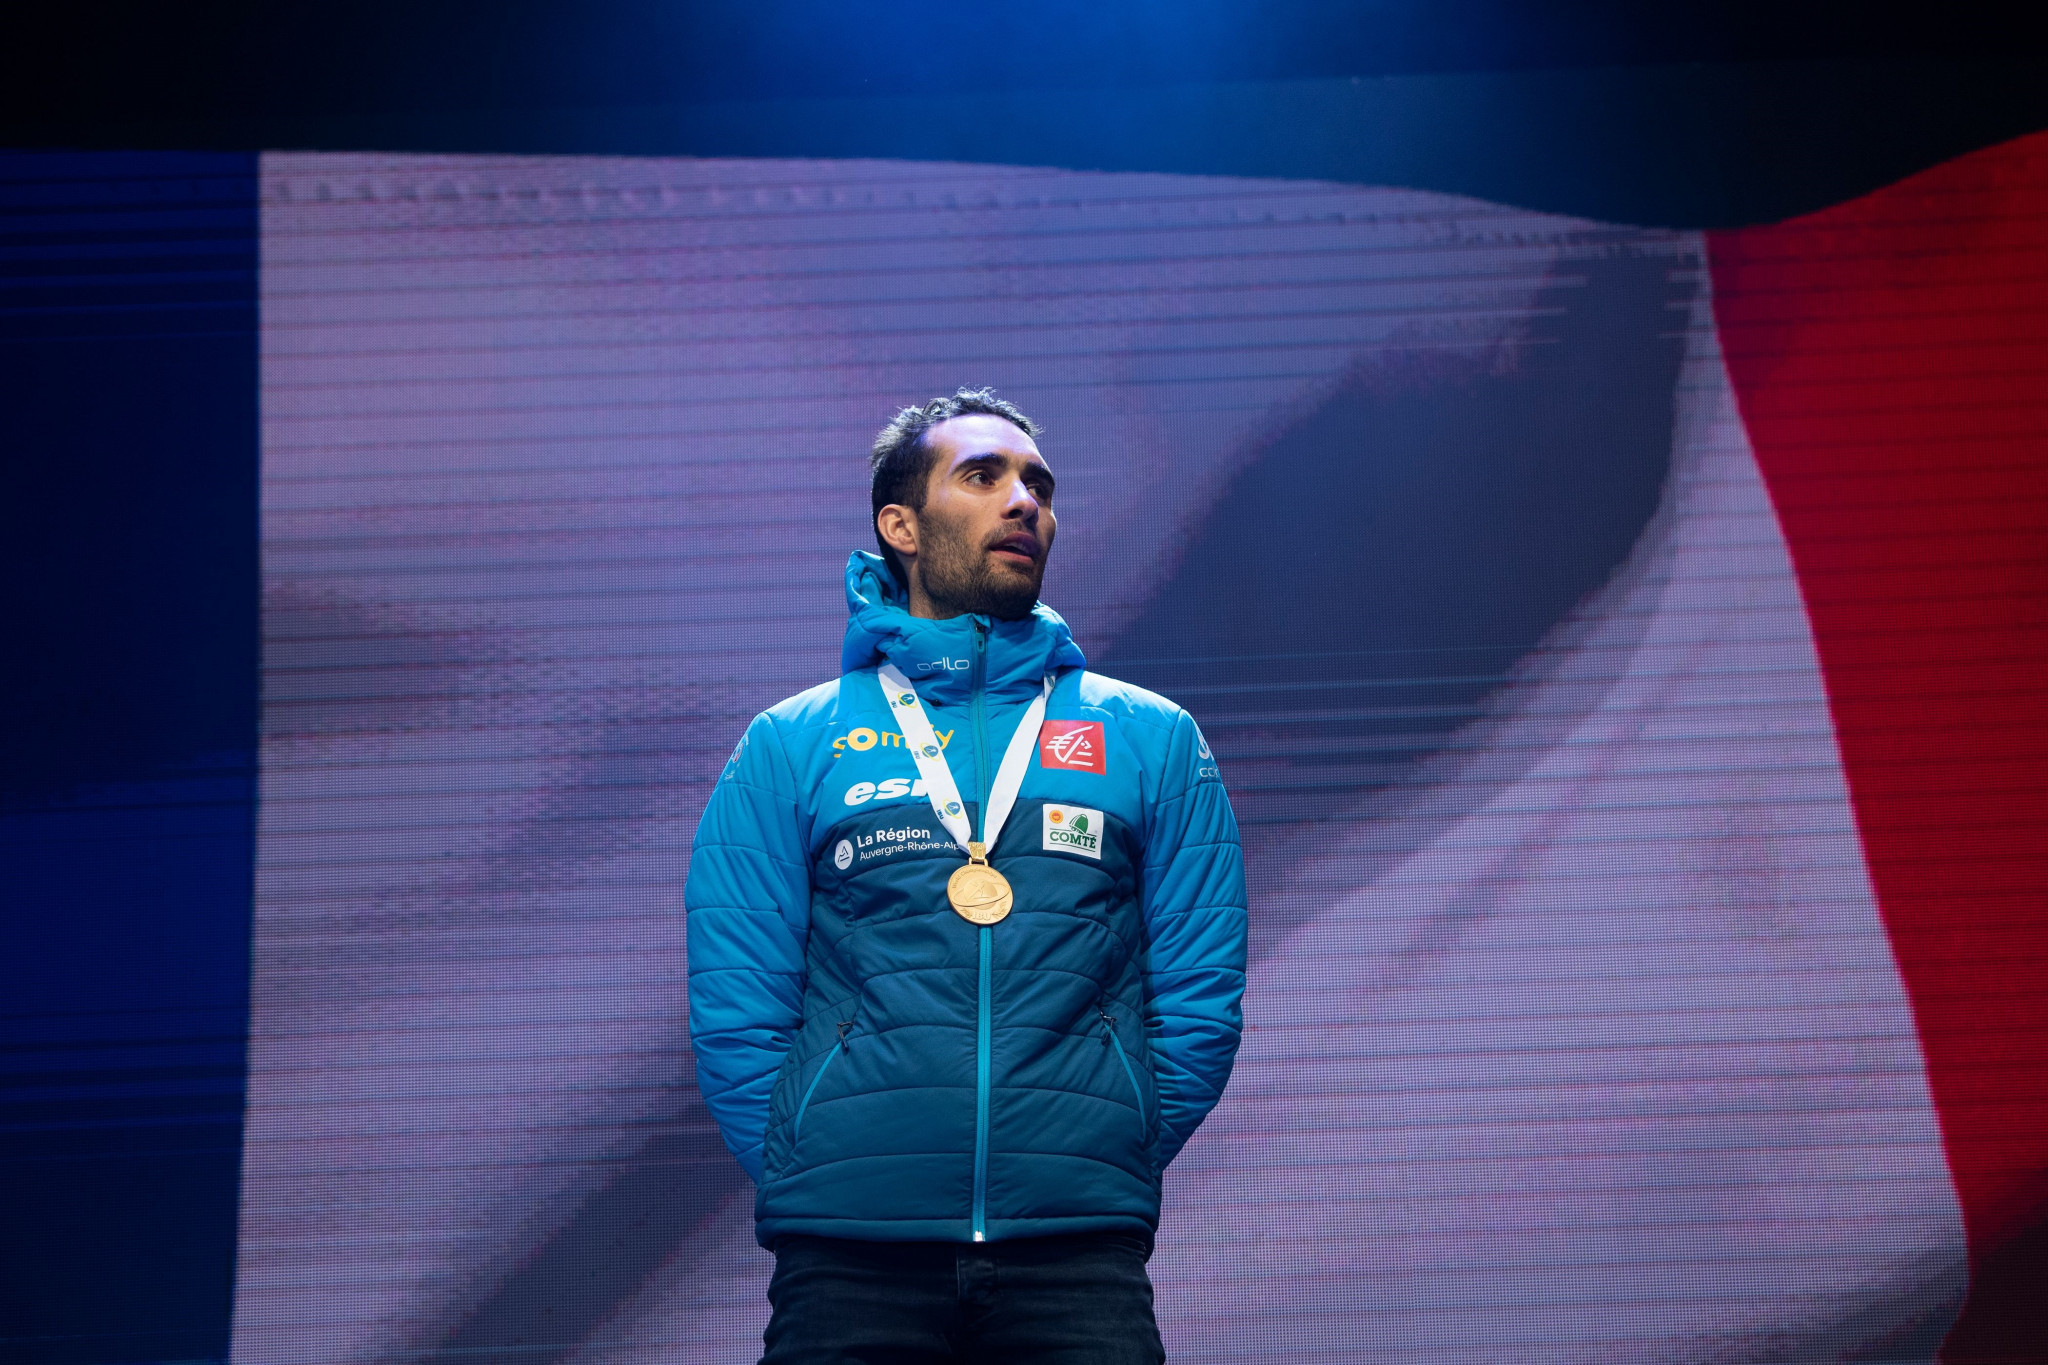 The Paris 2024 Athletes' Commission, led by Martin Fourcade, has reportedly expressed concerns over the plastic bottle model for the Games ©Getty Images